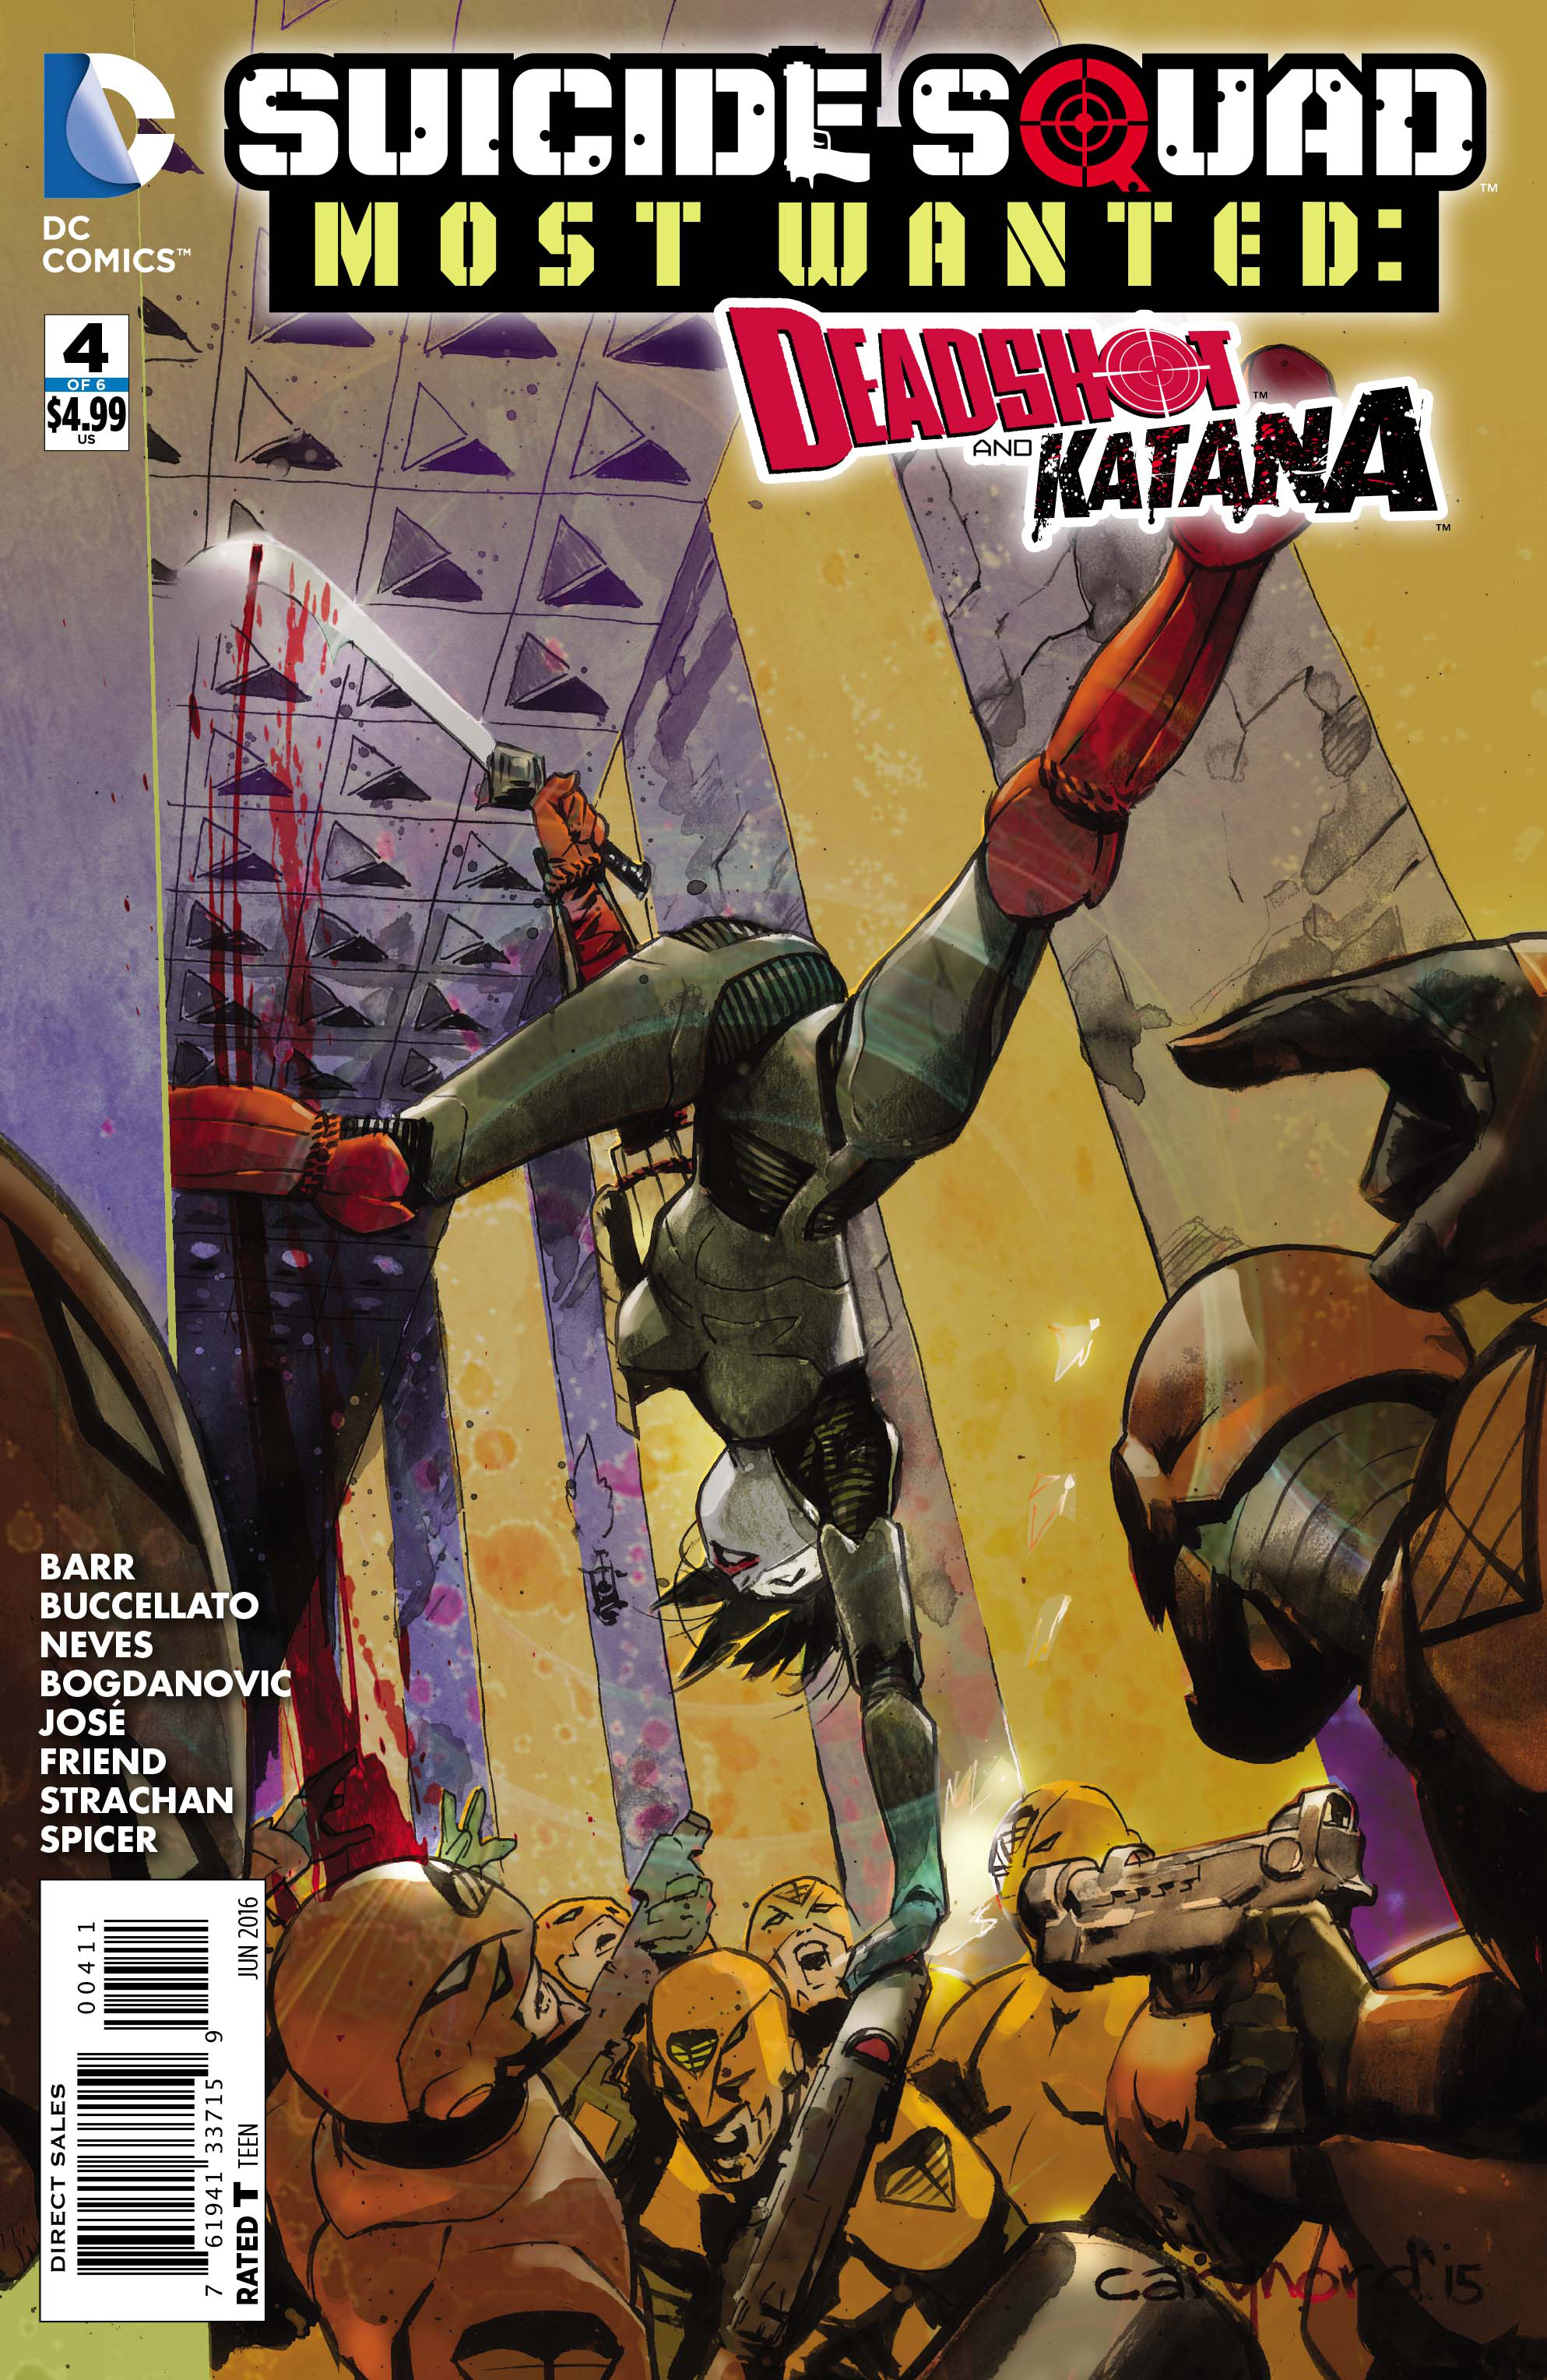 SUICIDE SQUAD MOST WANTED DEADSHOT KATANA #4 (OF 6)